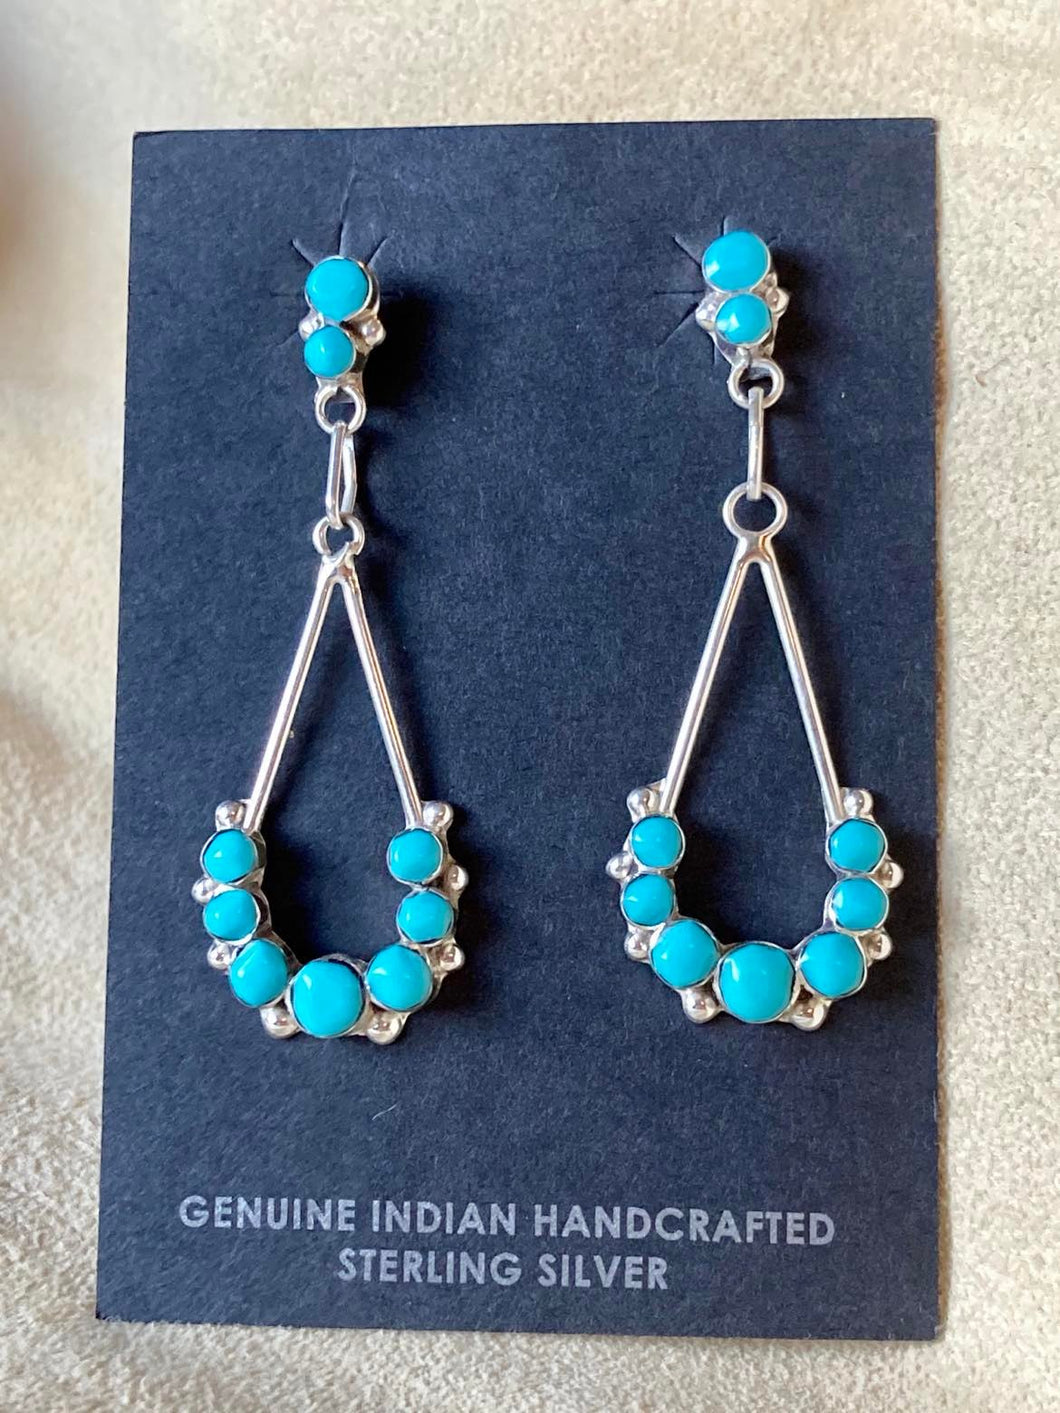 Tear-drop Turquoise and Silver Earrings